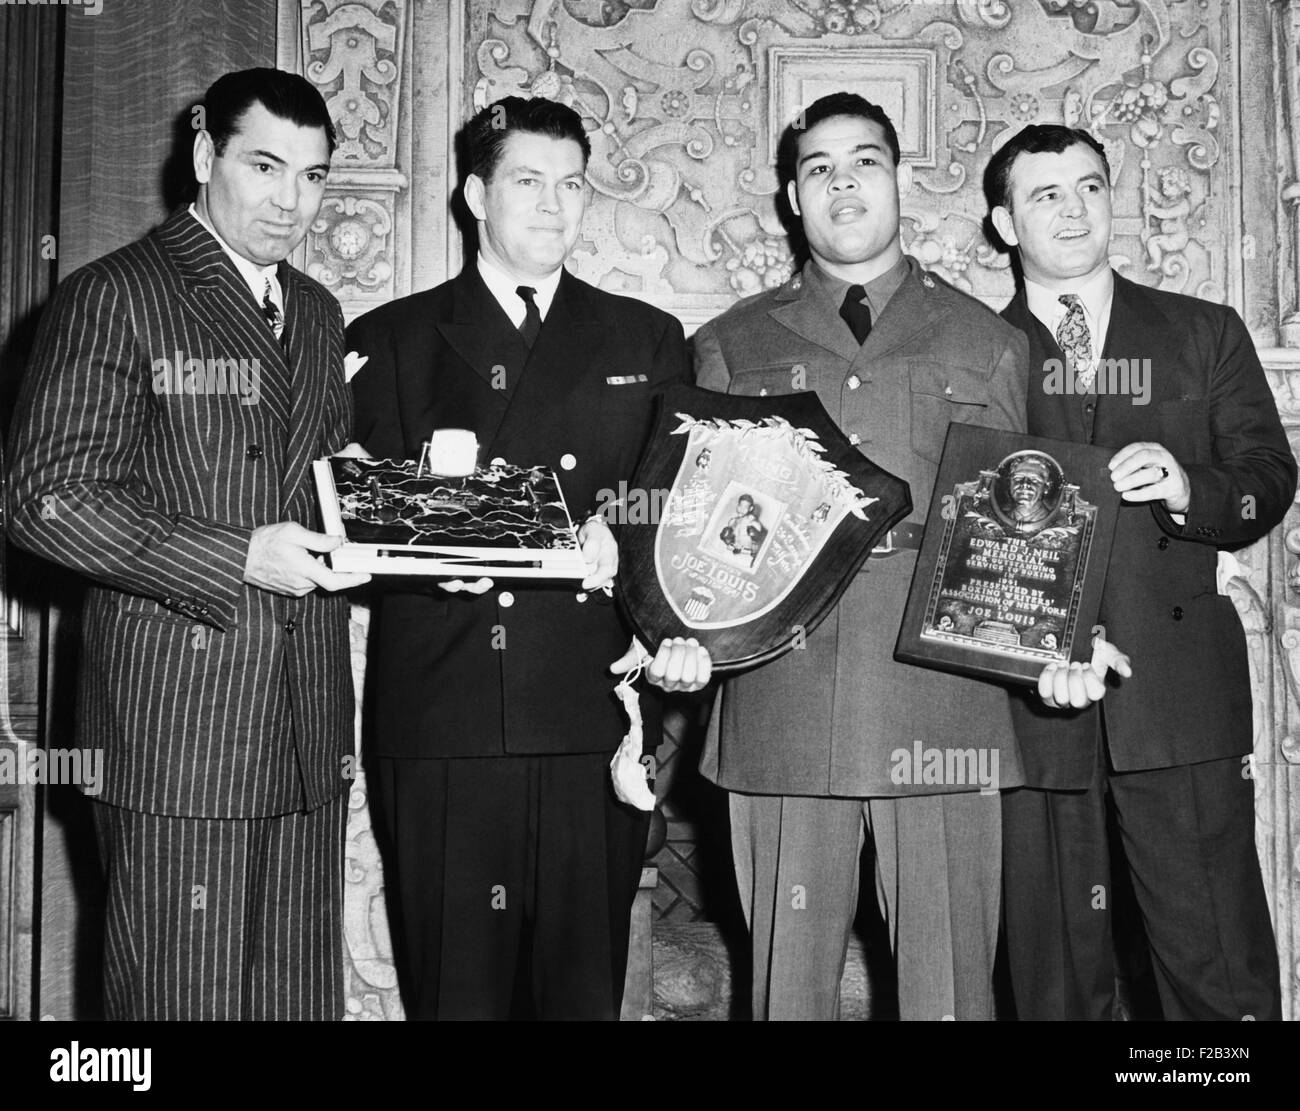 Four boxing champions at the Annual Dinner of the Boxing Writer's Assn. At the Ruppert Brewery in NYC. Jan. 21, 1942. L-R: Holding three awards presented at the dinner are: Jack Dempsey, Lt. Cmdr. Gene Tunney, Private Joe Louis, and James  Braddock. The trophies are, L-R: Boxing Writers Award to Gene Tunney for his services to his country and to boxing; Ring Magazine Merit Award for 1941, given with the Edward J. Neil Trophy, to Joe Louis. - (CSU 2015 5 155) Stock Photo